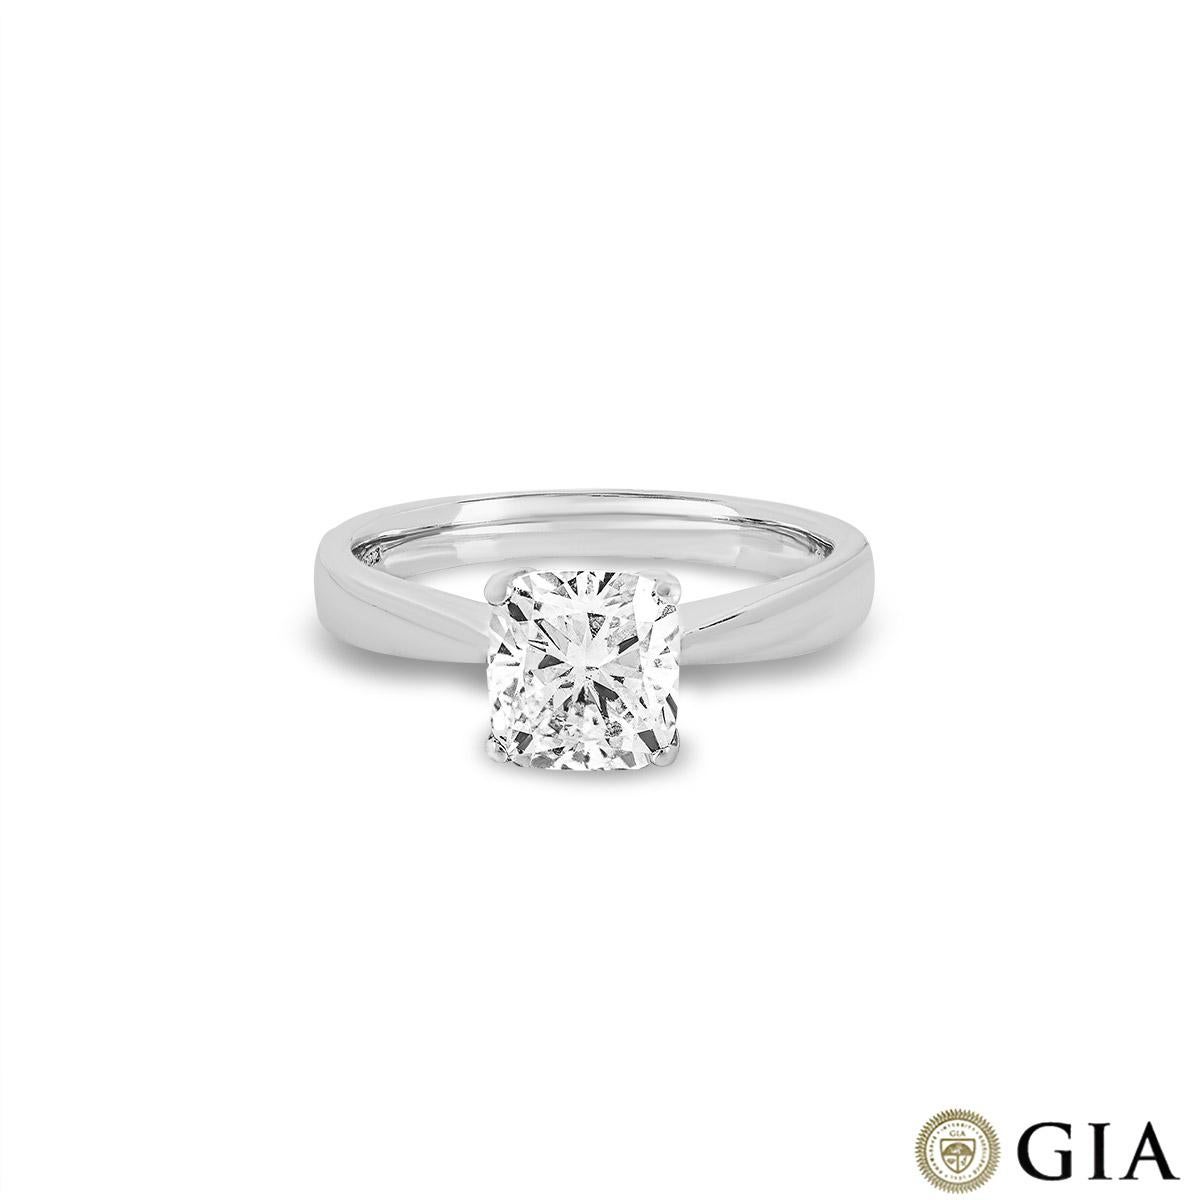 GIA Certified White Gold Cushion Cut Diamond Ring 1.66ct I/VS1 In New Condition For Sale In London, GB